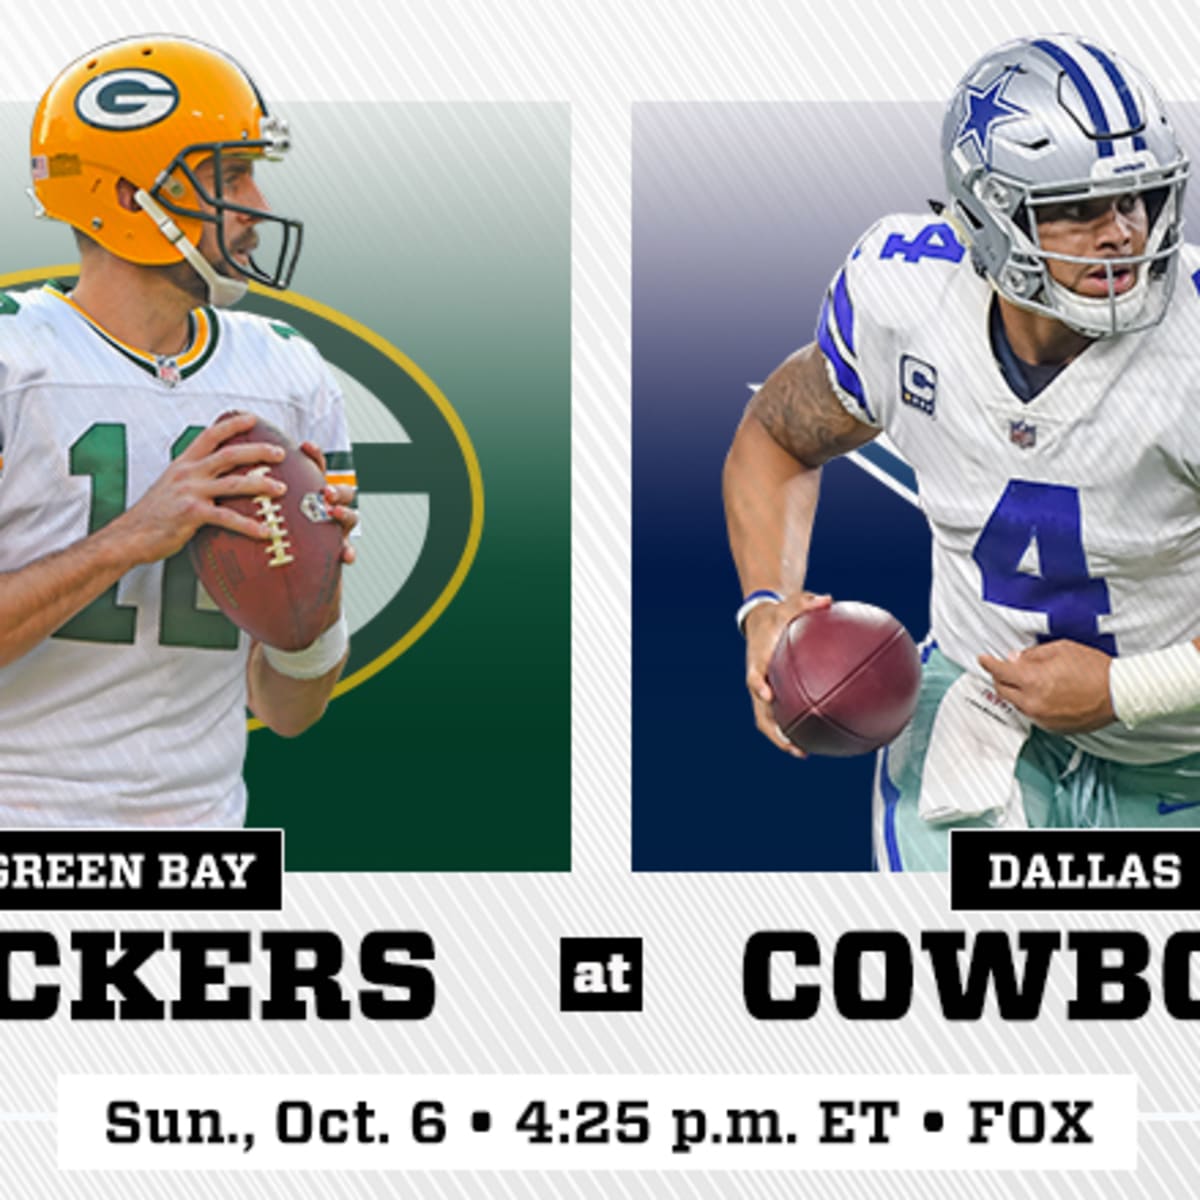 packers vs cowboys watch live